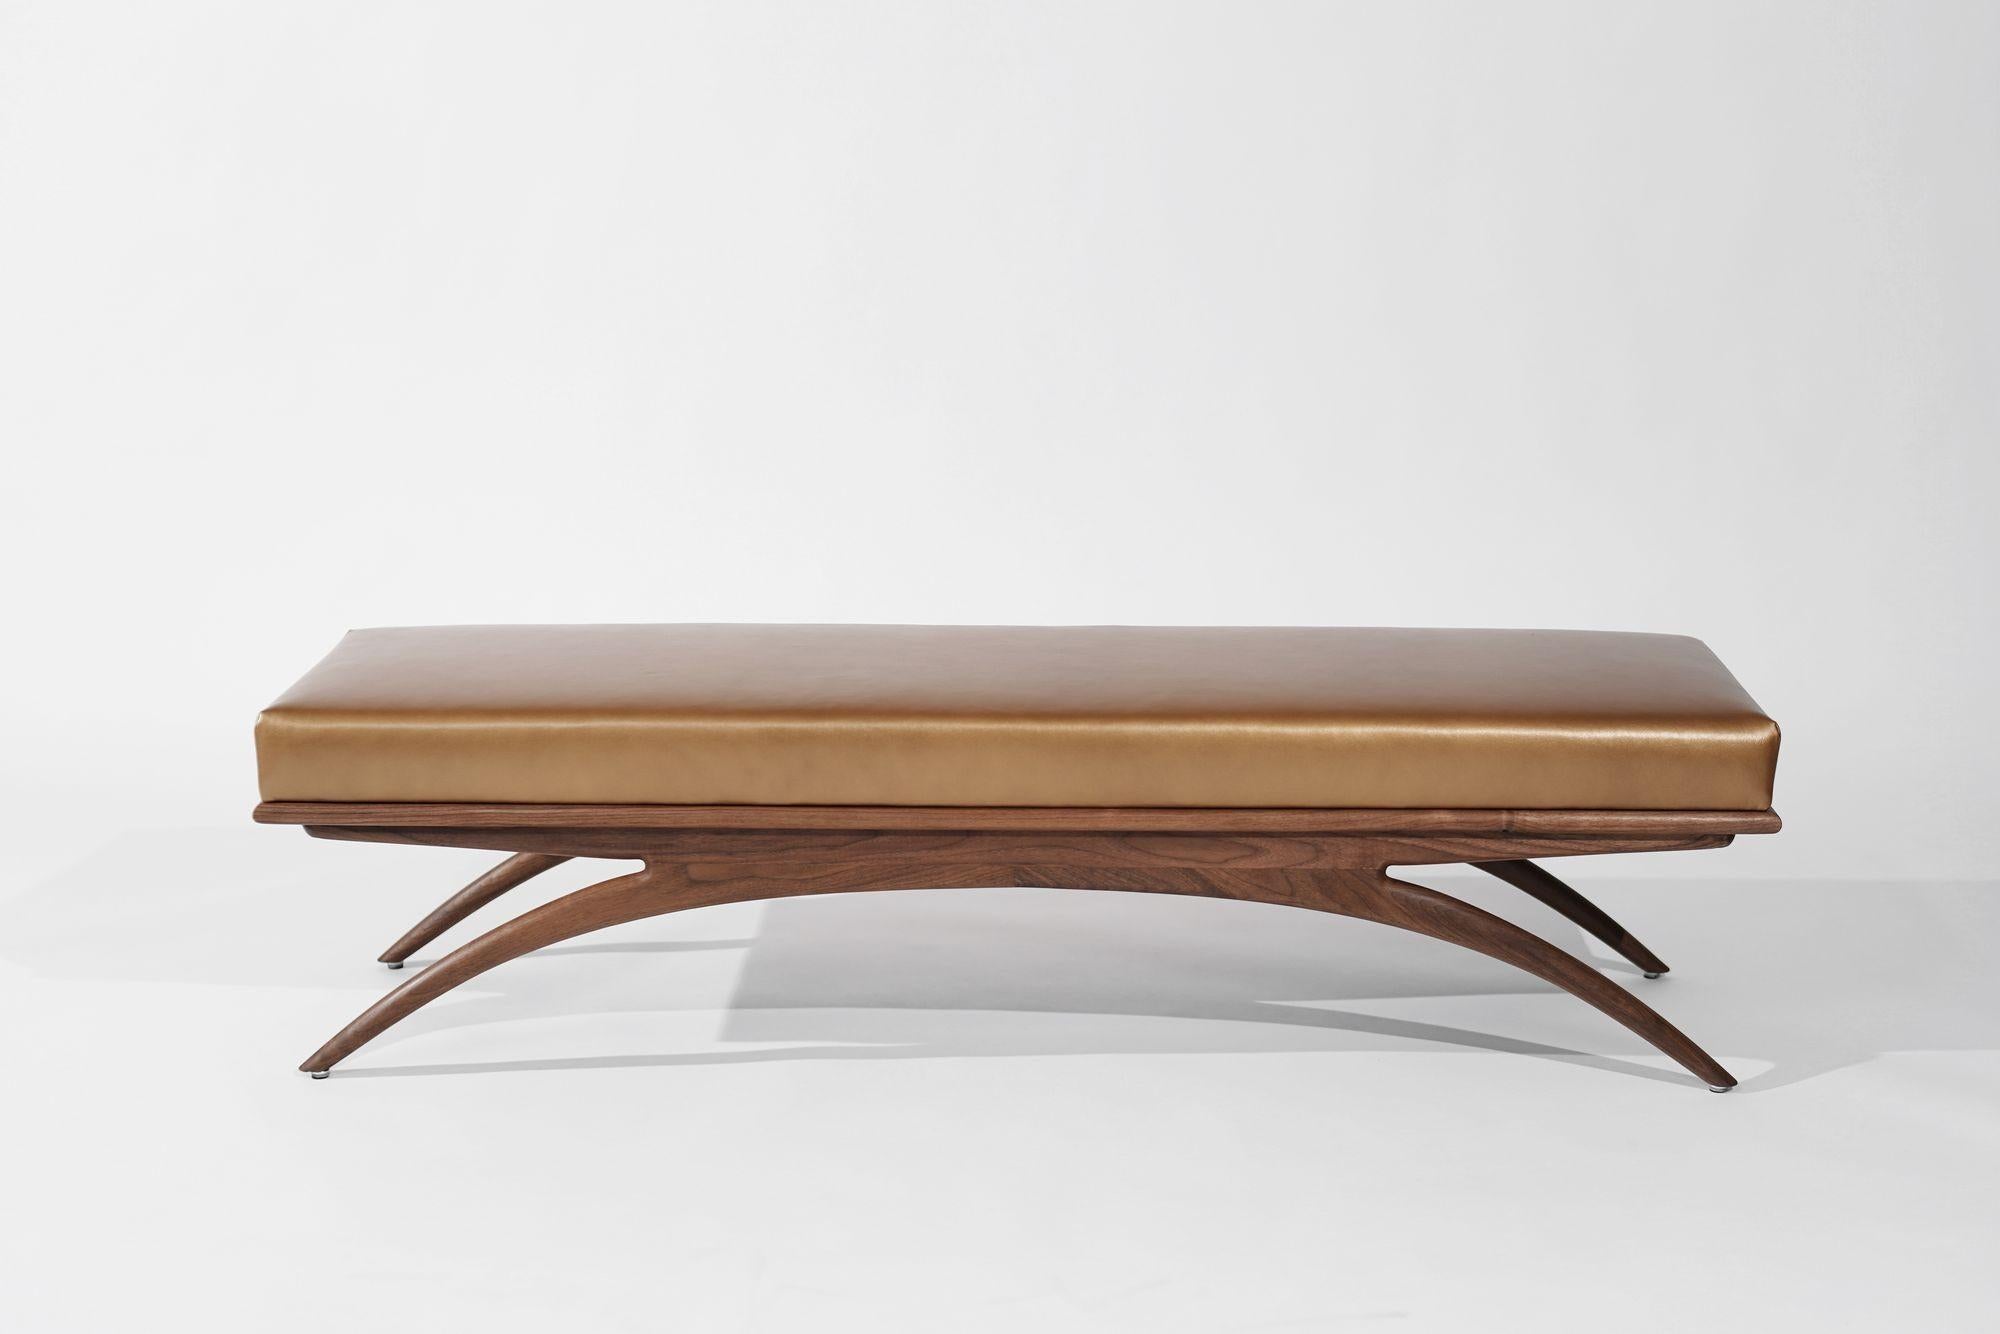 Introducing the Convex Bench by Carlos Solano for Stamford Modern—an exquisite blend of timeless craftsmanship and lightweight design. Meticulously crafted from solid oak or walnut, this bench exudes sophistication, making it a perfect complement to